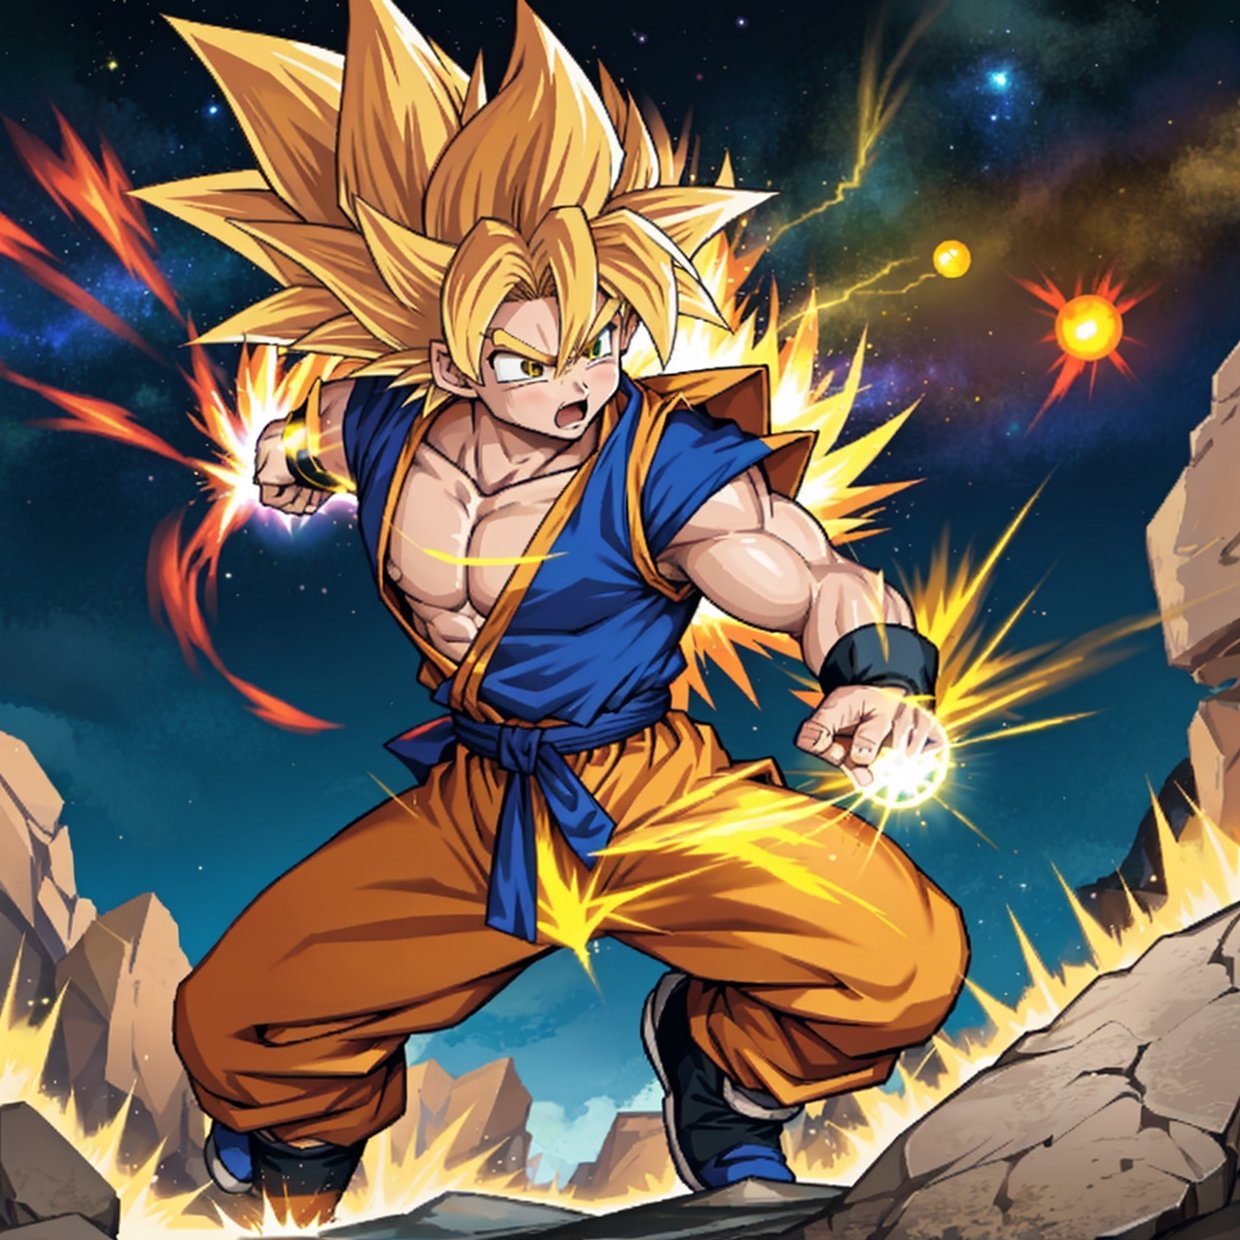 best quality,ultra-detailed,realistic,anime,Dragon Ball,super saiyan,goku,powerful energy blasts,fighting pose,floating in mid-air,intense battle scene,bright vibrant colors,dynamic action,ki aura,spiky hair,strong muscular physique,epic battle,explosions and destruction,surrounded by debris and dust,fierce expression,power level over 9000,flying rocks,mystical dragon,shenron,summoning dragon balls,seven orange glowing balls,emitting golden light,dragon's fiery breath,dragon scales and wings,fiery orange and yellow colors,epic power unleashed,cosmic energy,energy beam clashes,energy waves,star-filled sky,beaming with power and determination,high-intensity energy training,training montage,dragon radar,adventure and exploration,universe at stake,fighting against villains,superhuman strength and speed,fusion technique,teamwork and friendship,legendary transformation.